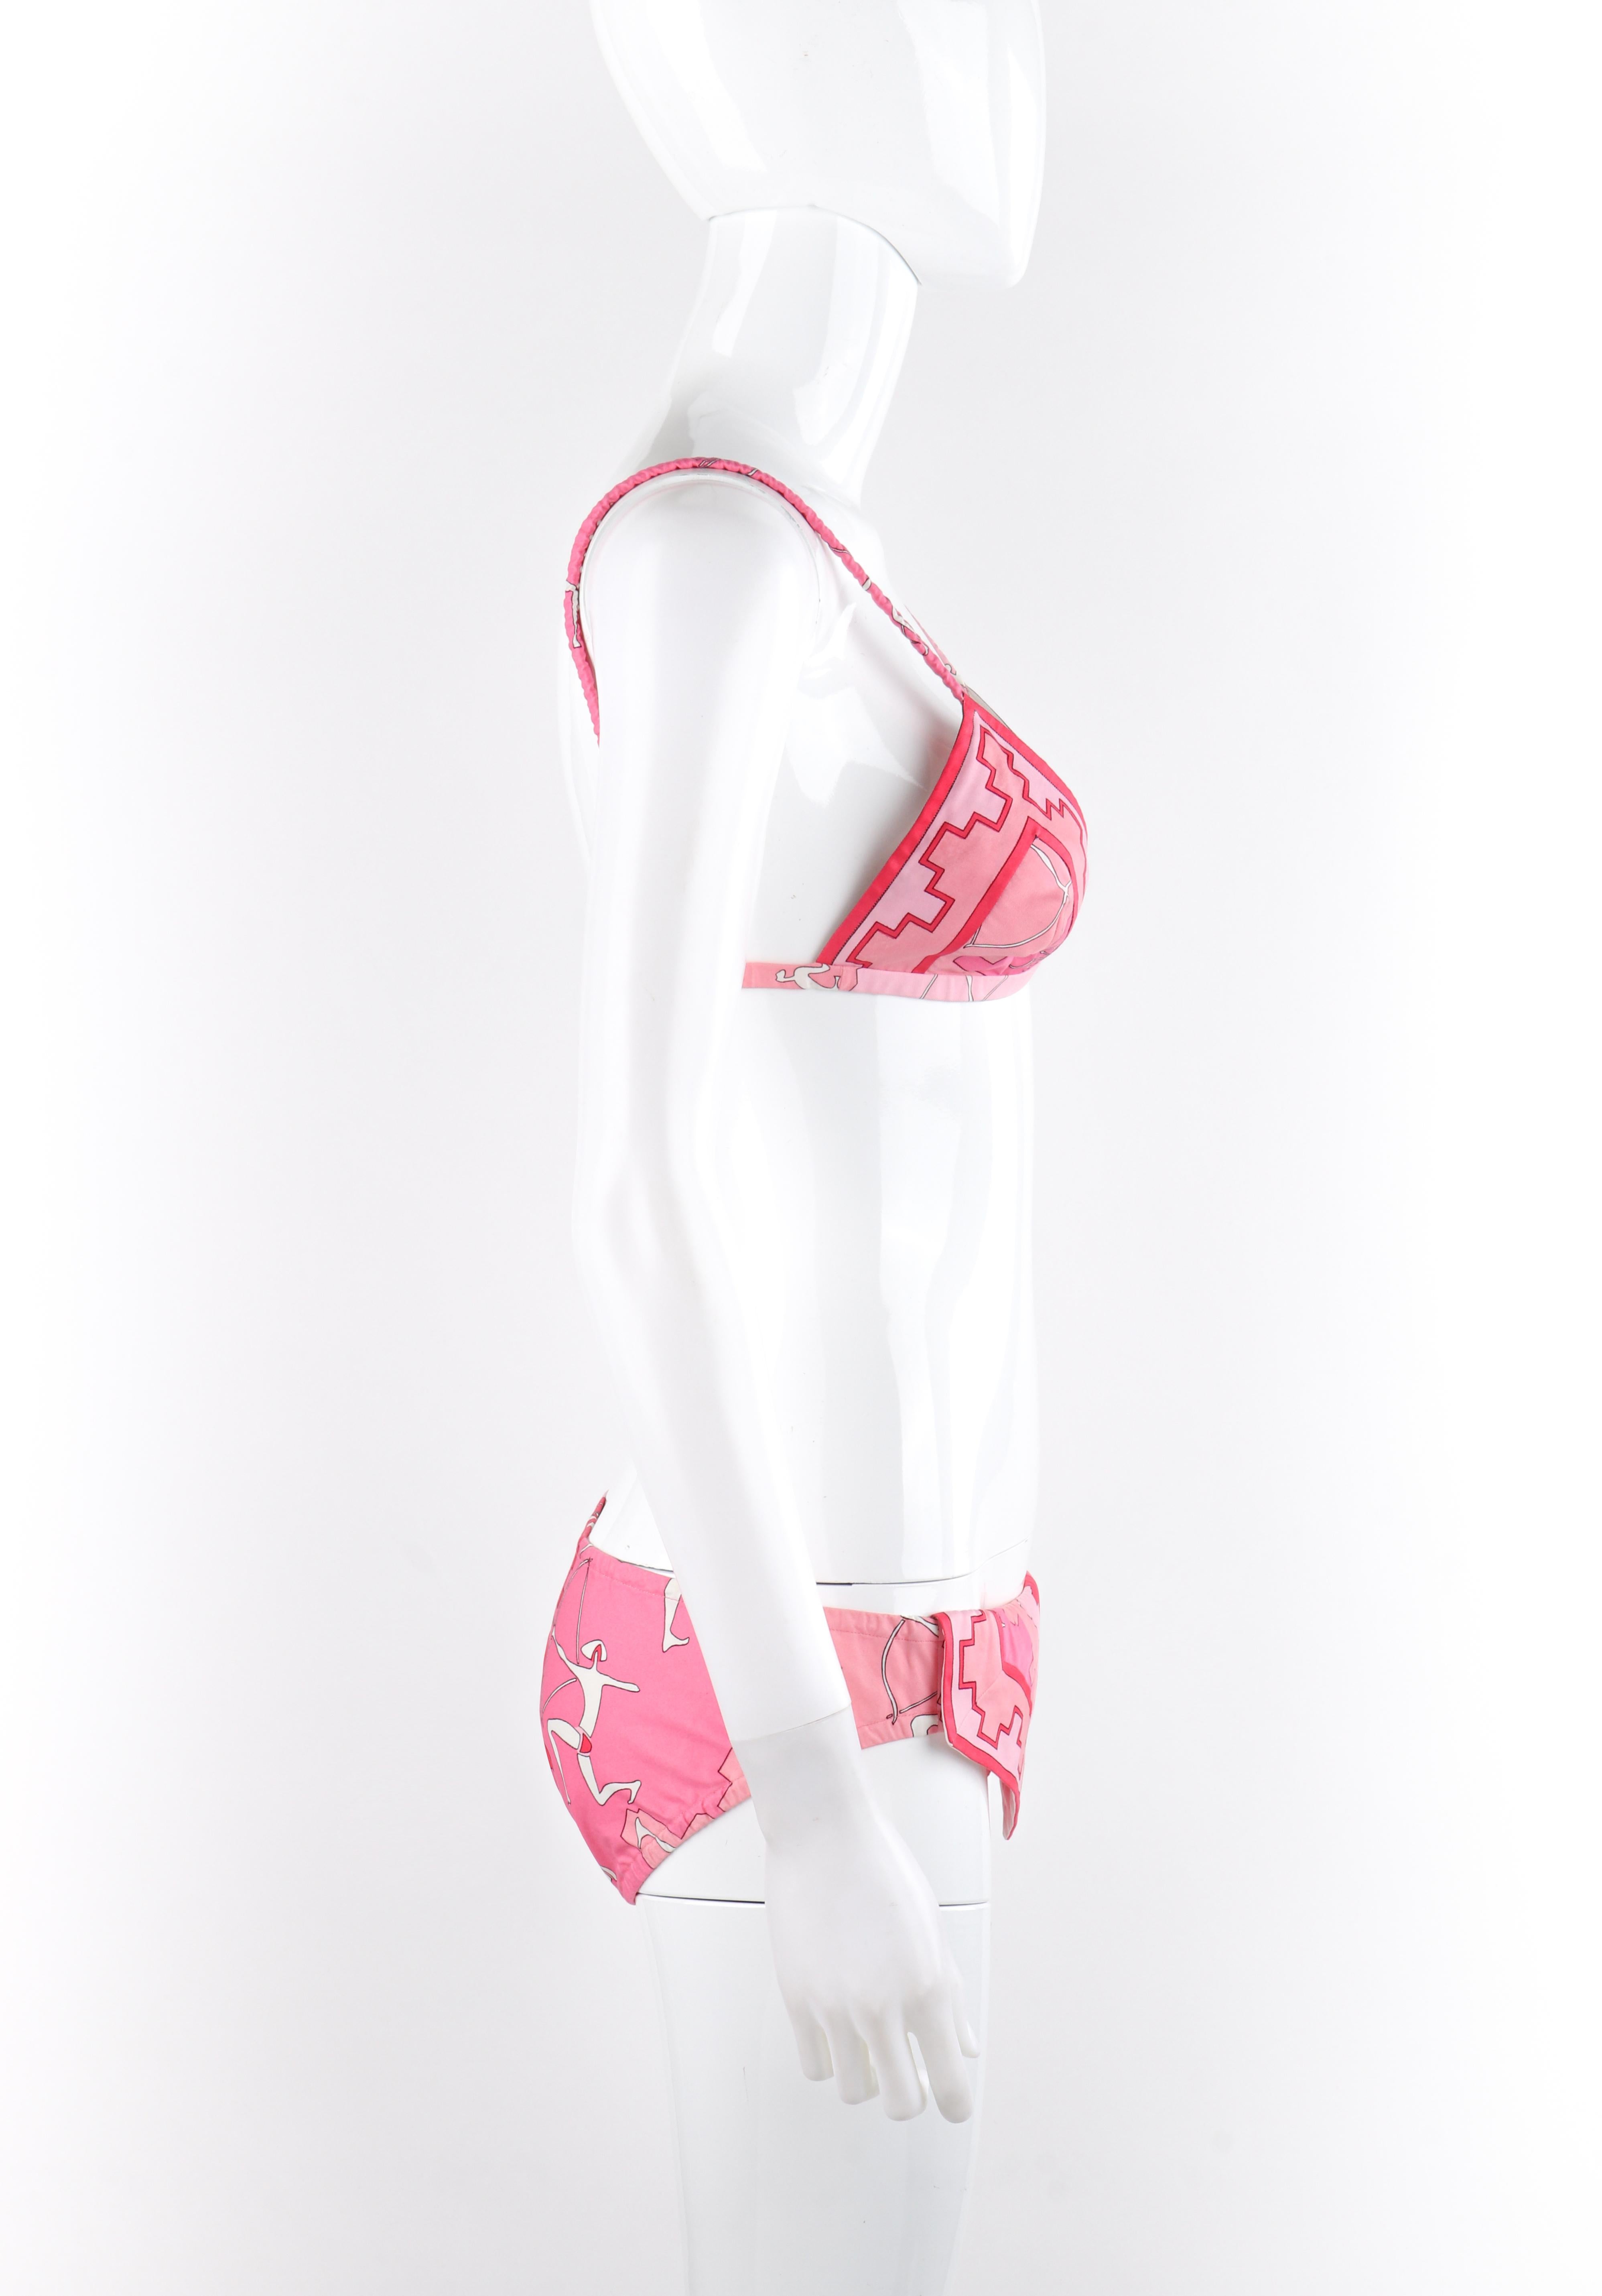 EMILIO PUCCI c.1970s Pink Geometric Novelty Figure 2 Pc Triangle Bikini Swimsuit In Good Condition For Sale In Thiensville, WI